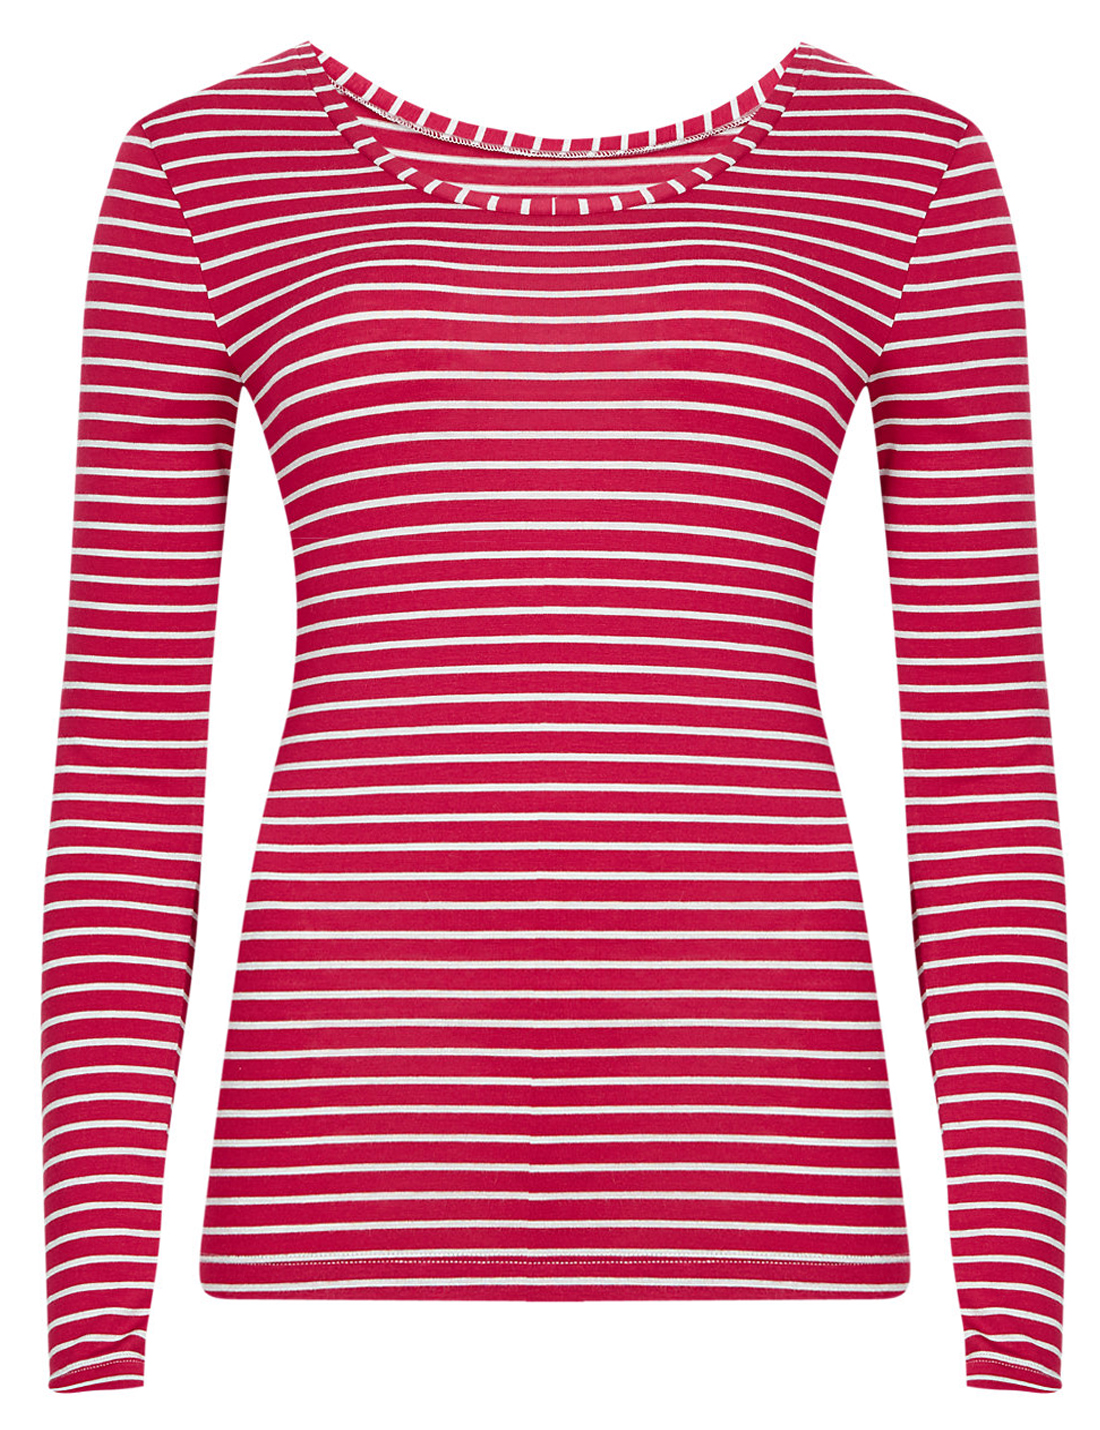 Marks and Spencer - - M&5 RED Striped Heatgen Thermal Long Sleeve Top ...